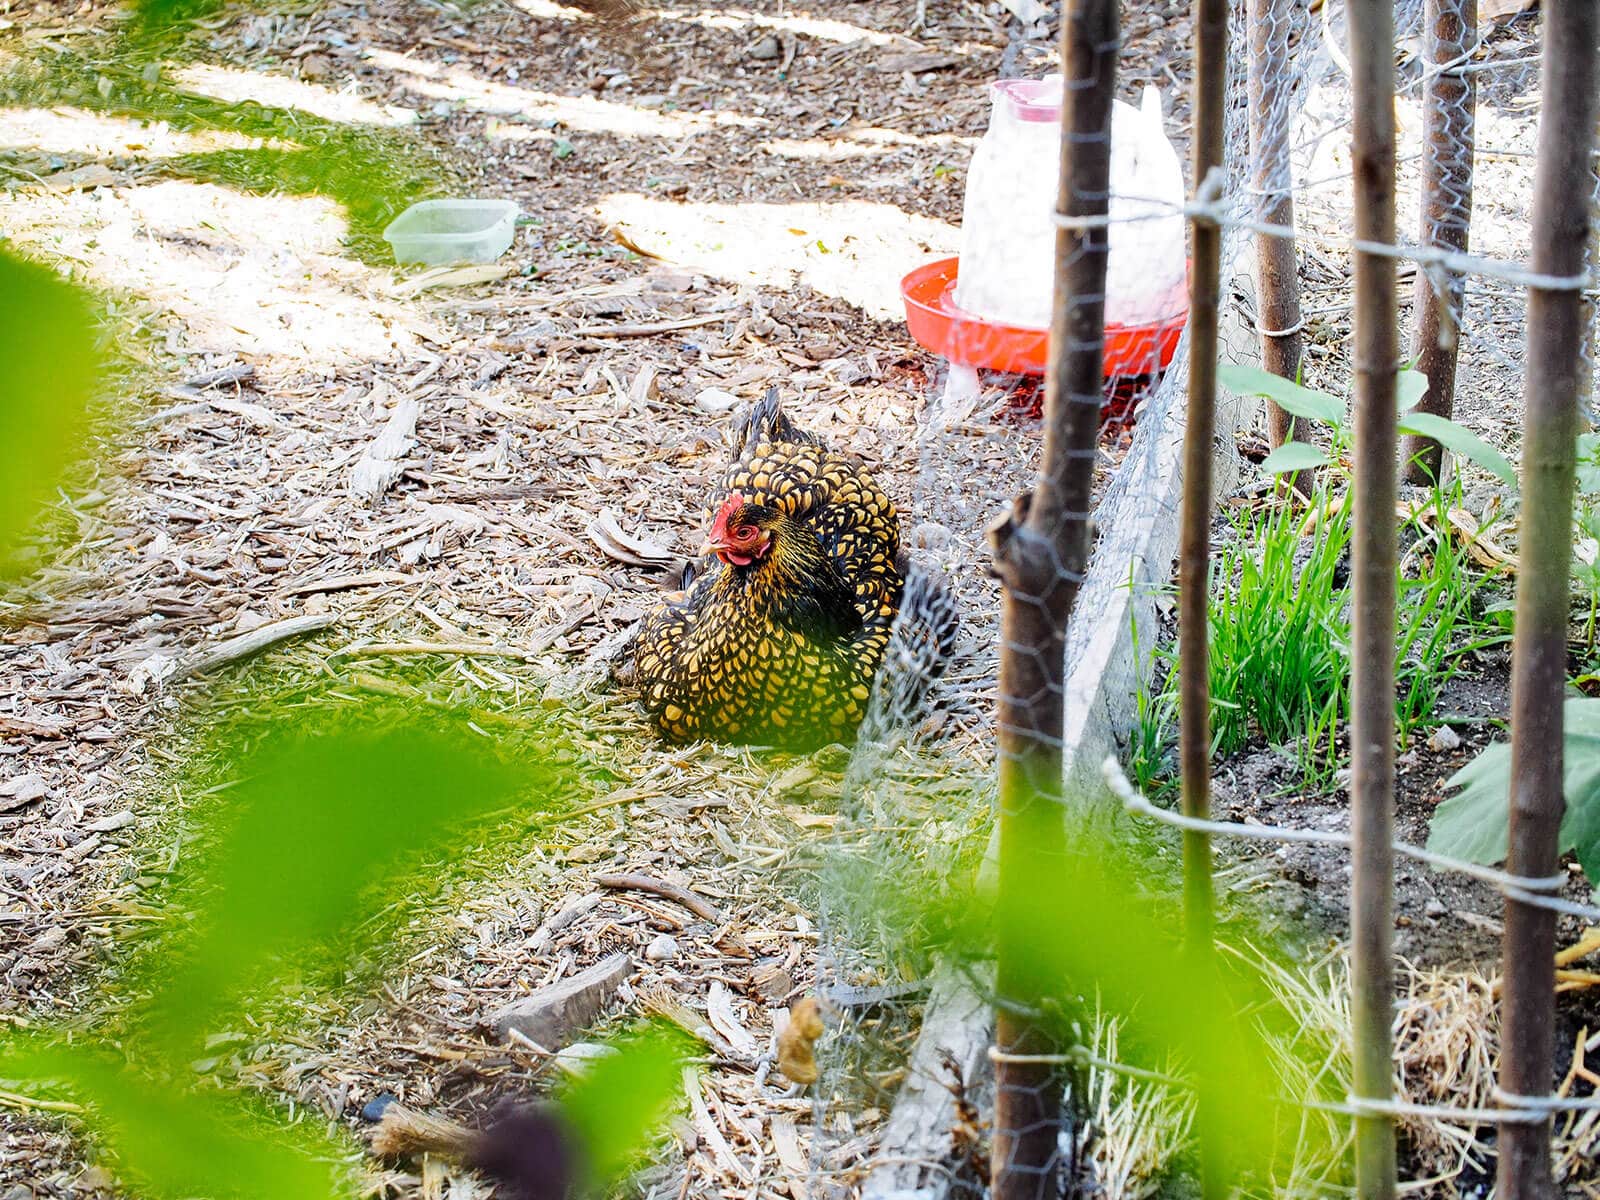 A broody chicken will sit just about anywhere, including a pile of mulch